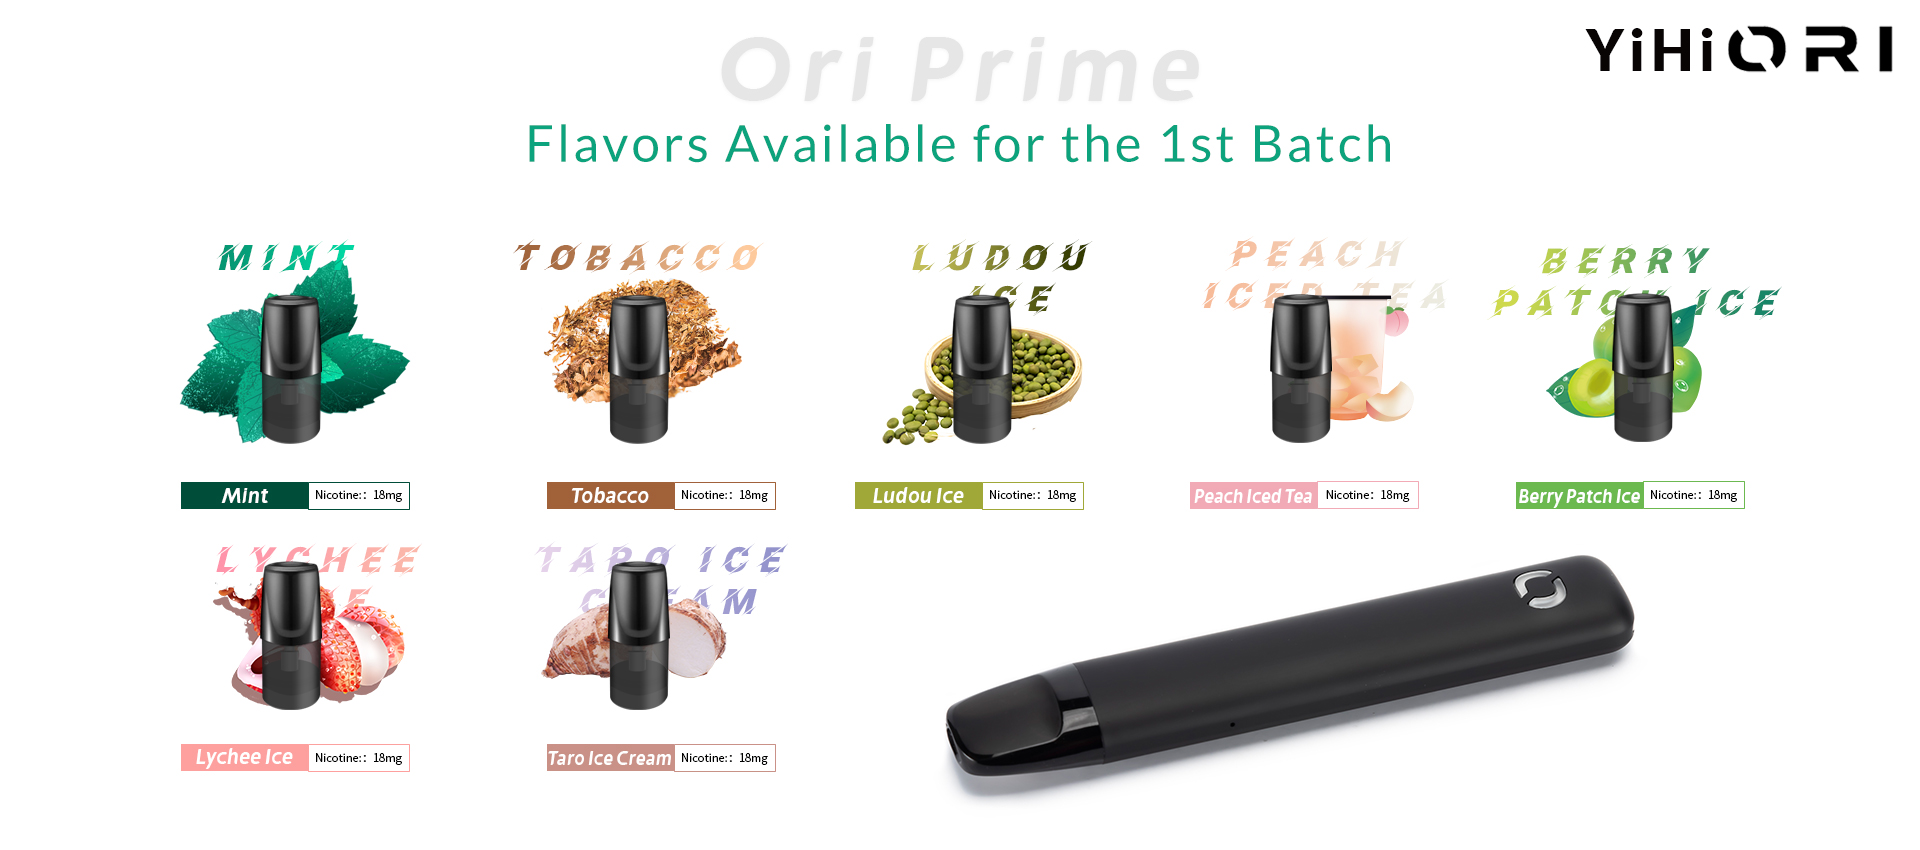 Available flavors for Ori Prime.jpg